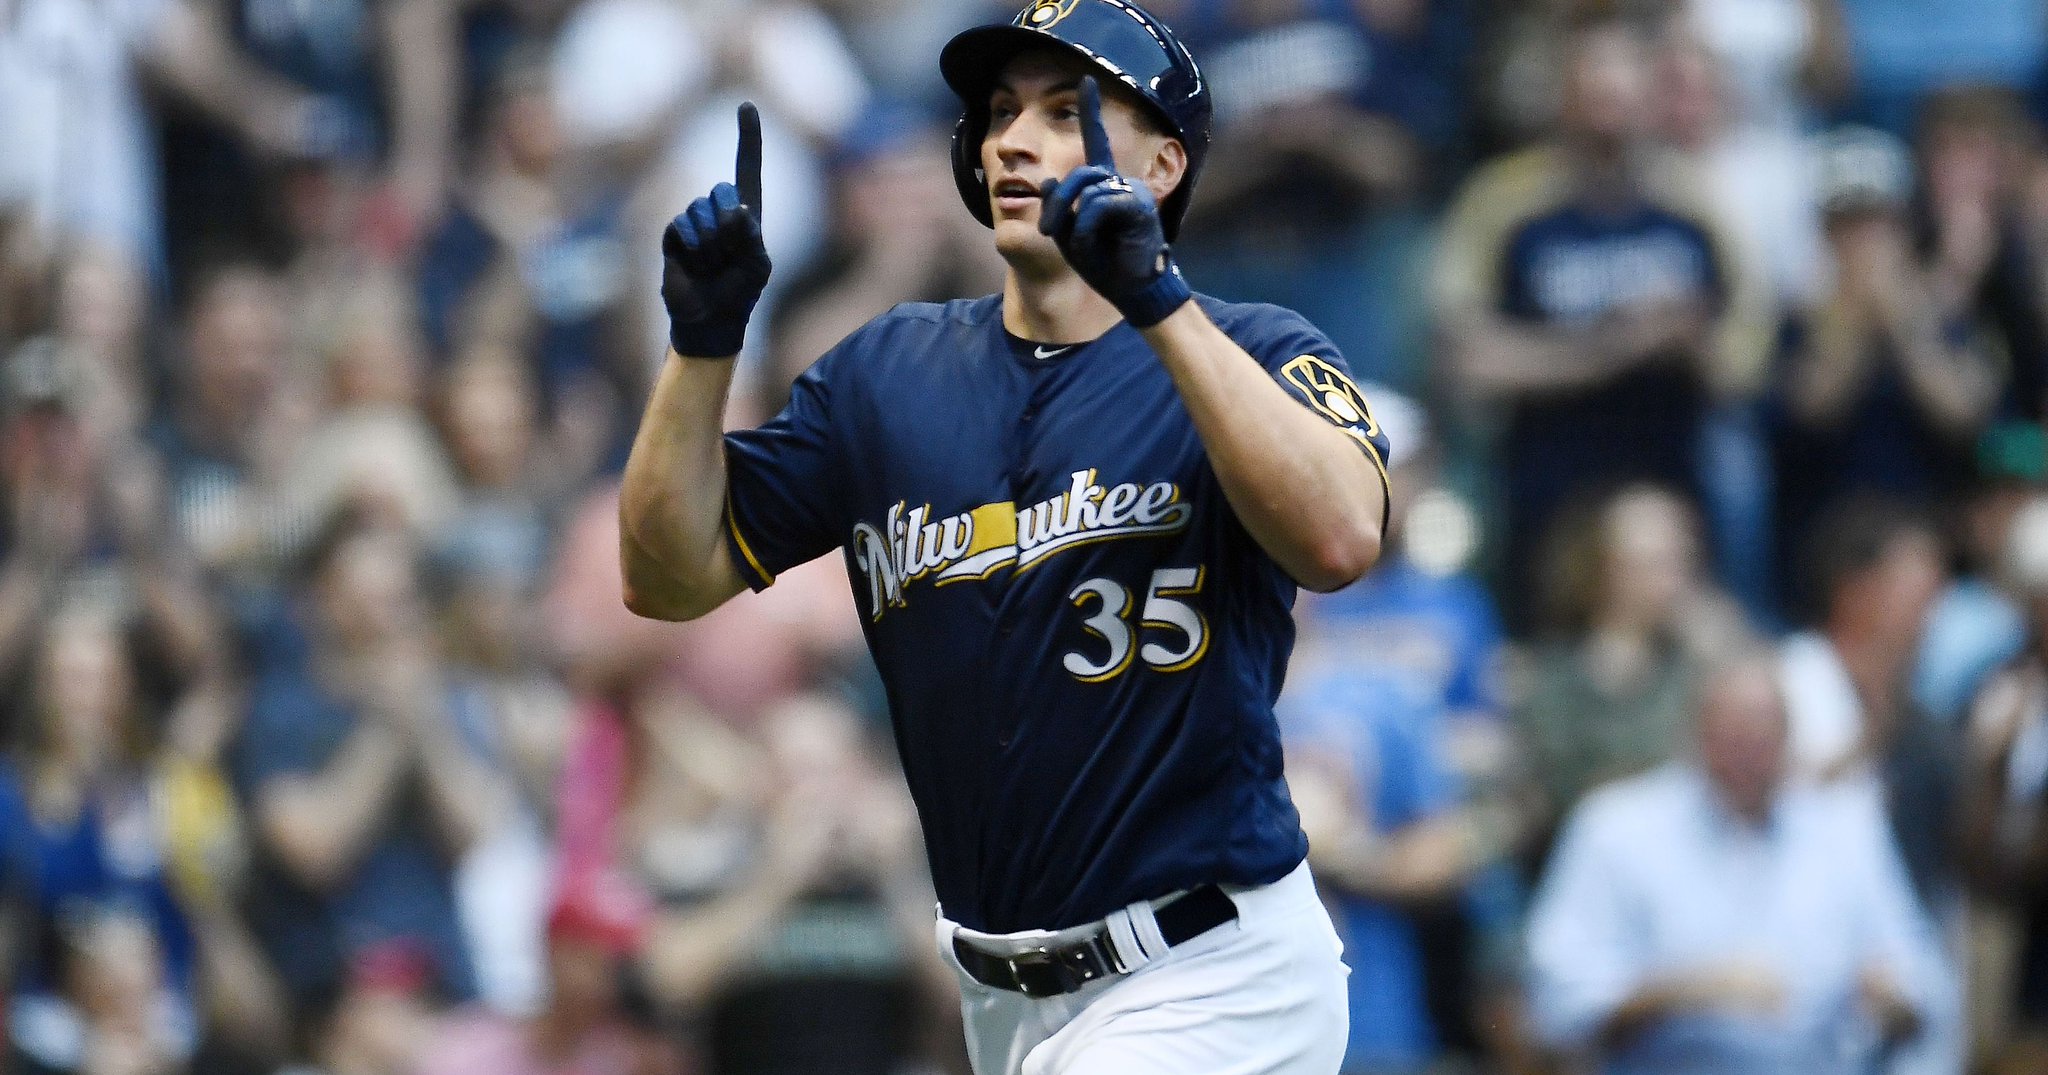 JSOnline - Brewers on Twitter: "Brewers 3, Indians 2: More injuries